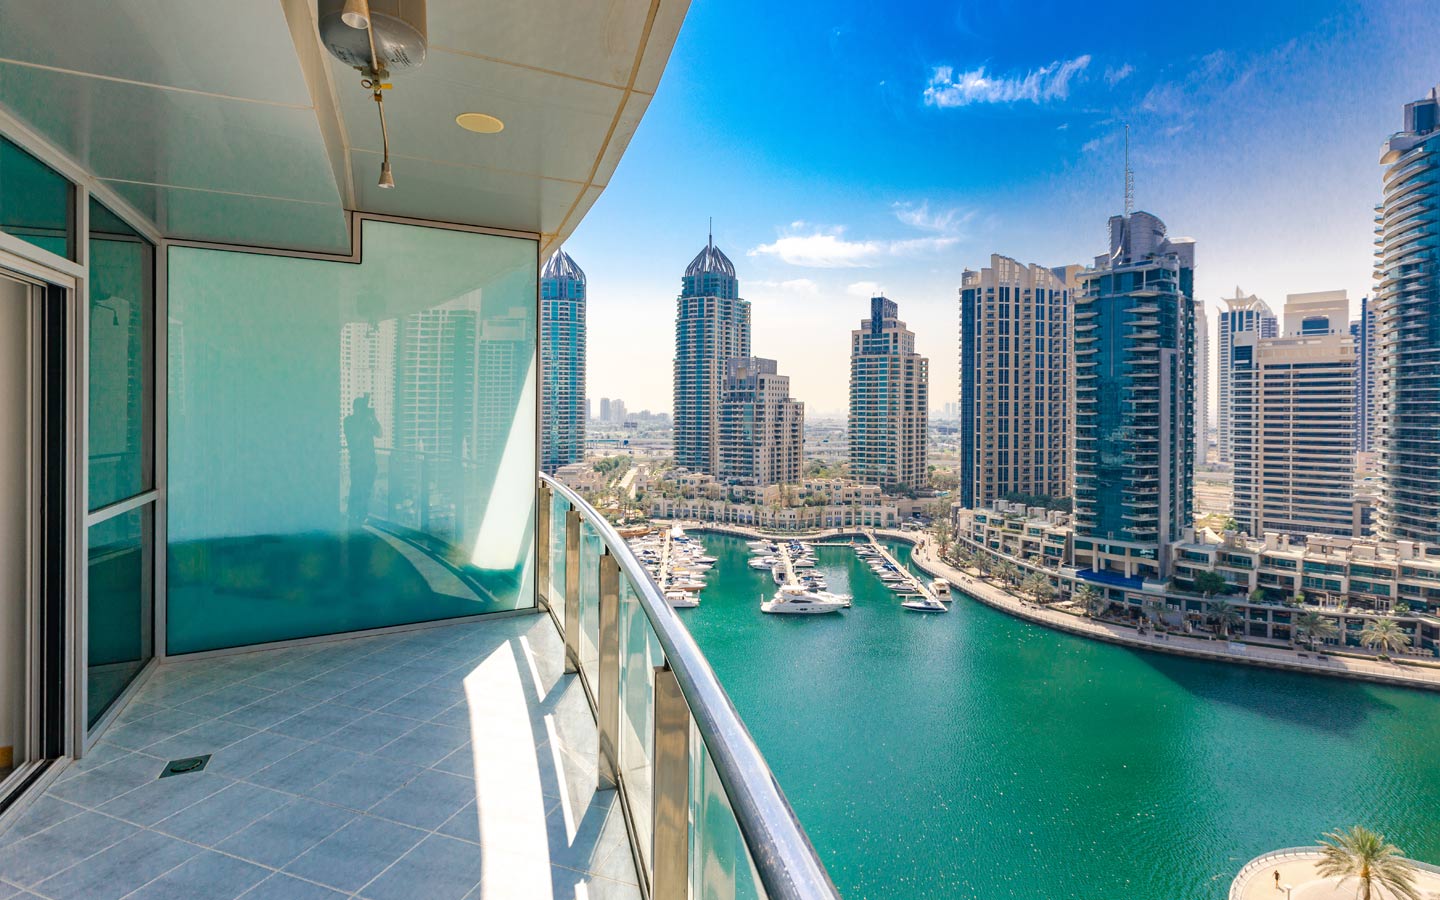 marina pinnacle is also among the top Buildings to Buy Apartments in Dubai Marina